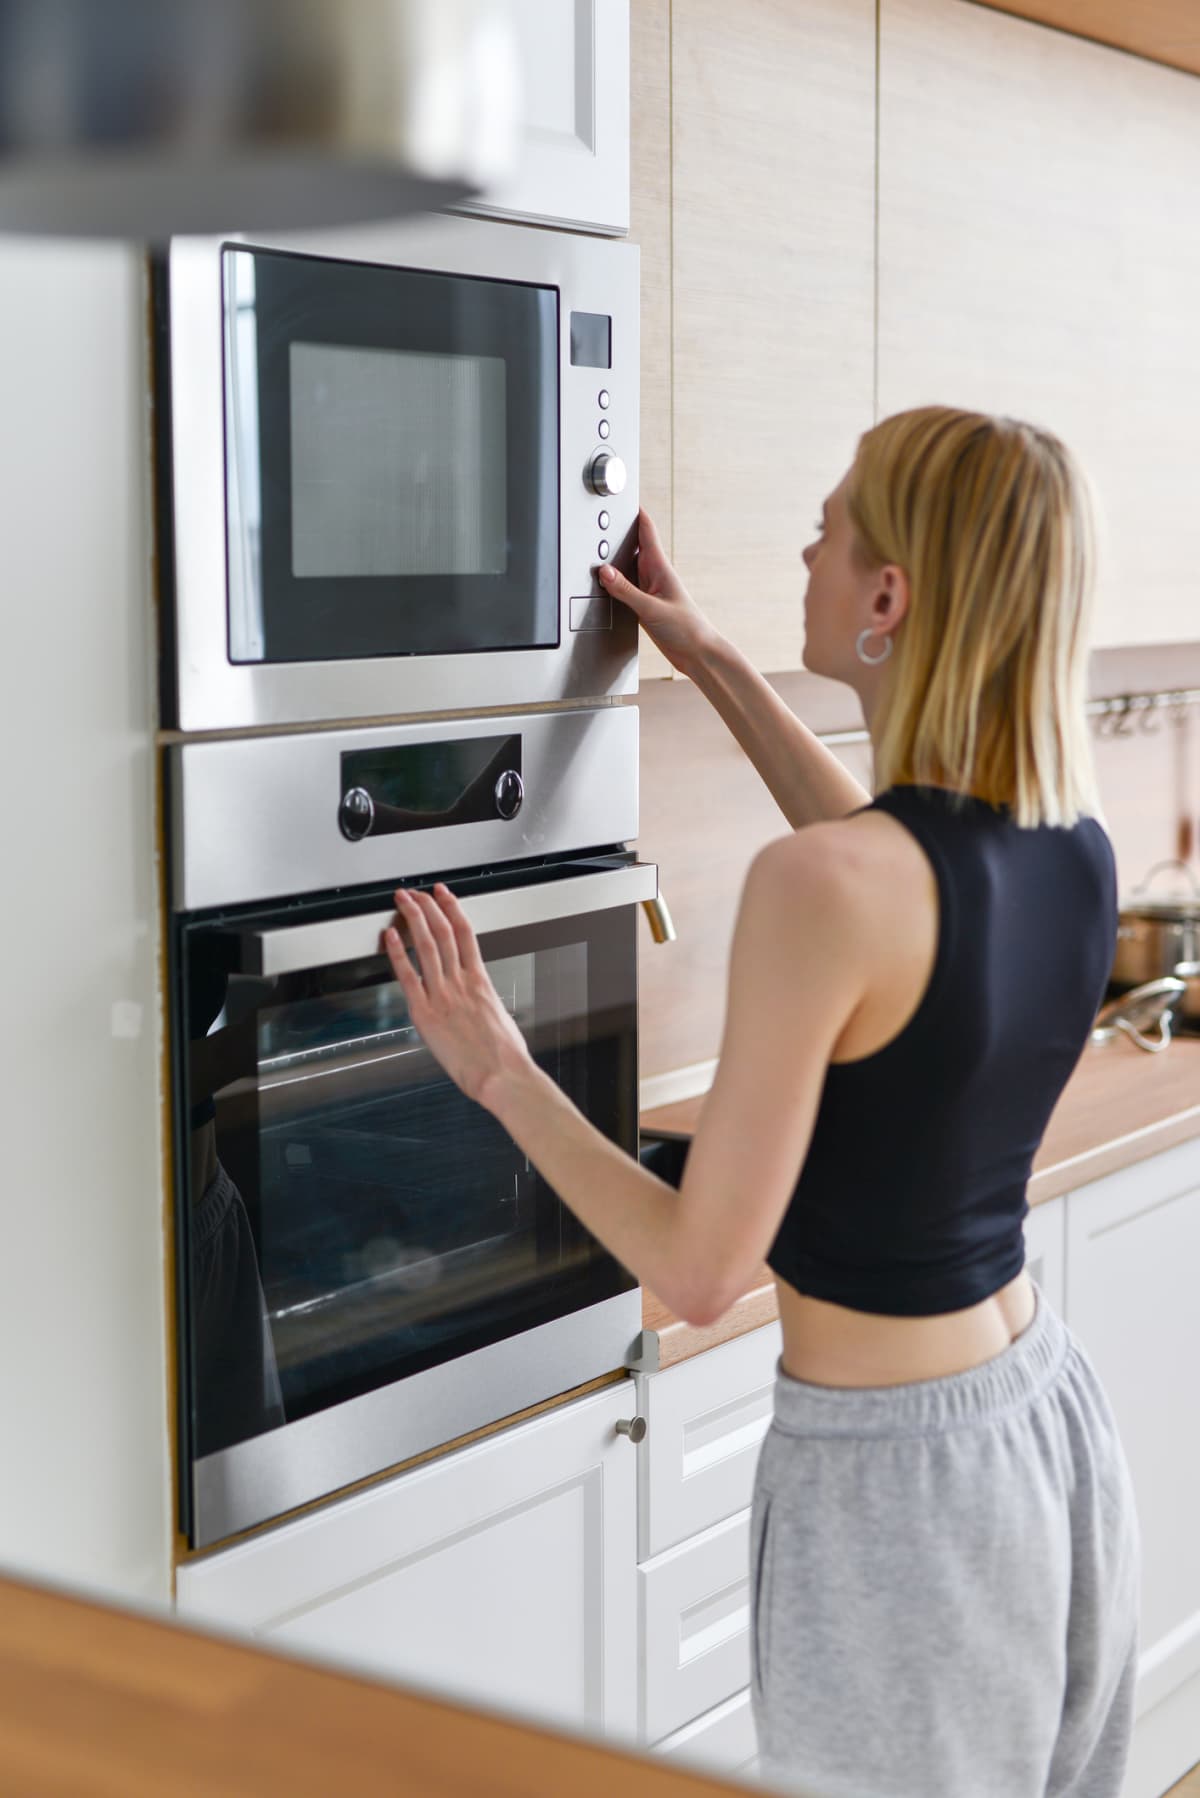 A woman places food in the microwave.